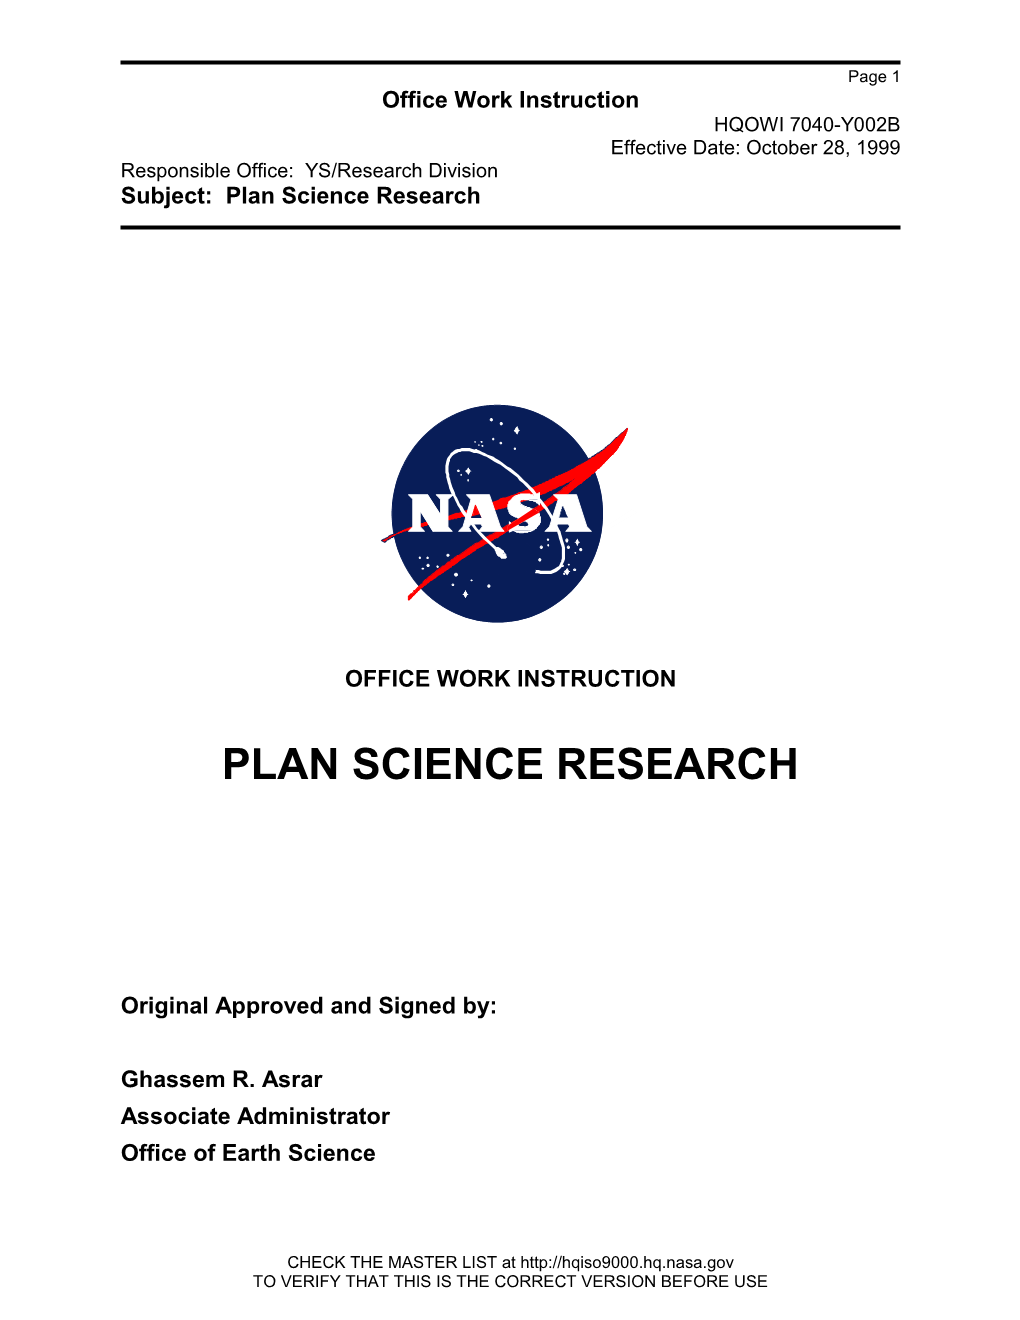 Plan Science Research